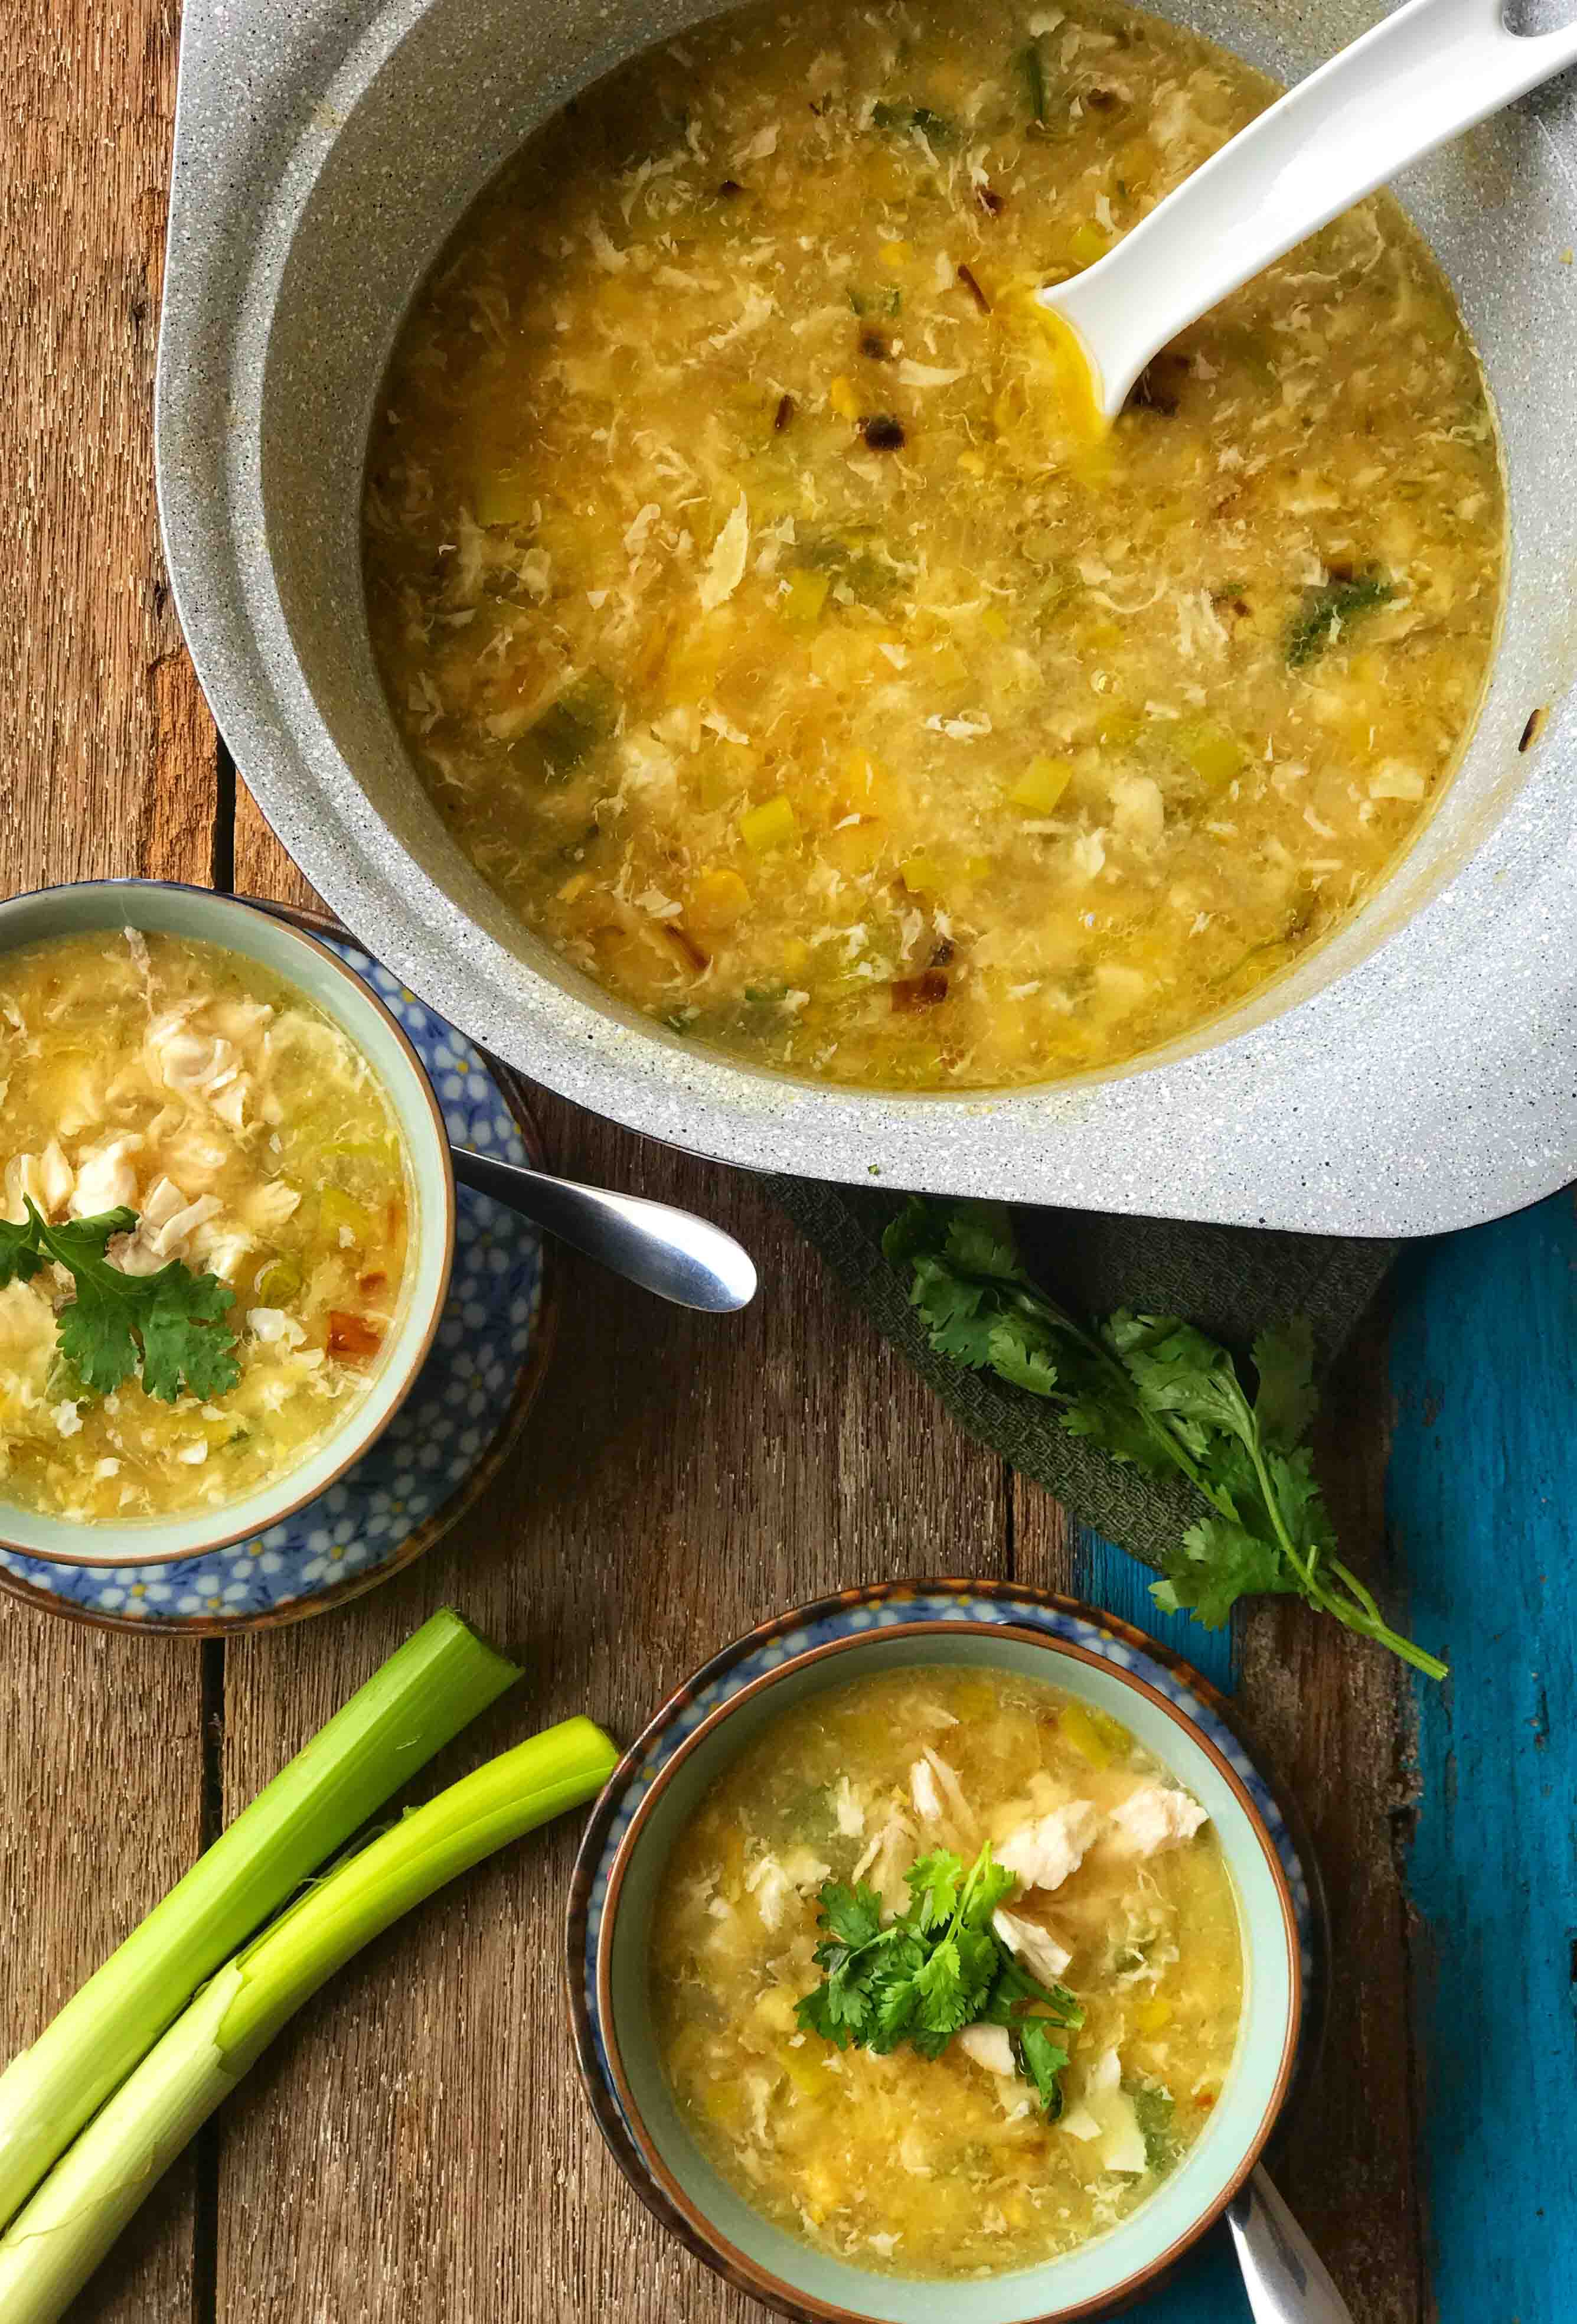 Lauk Simple – Chicken And Corn Soup